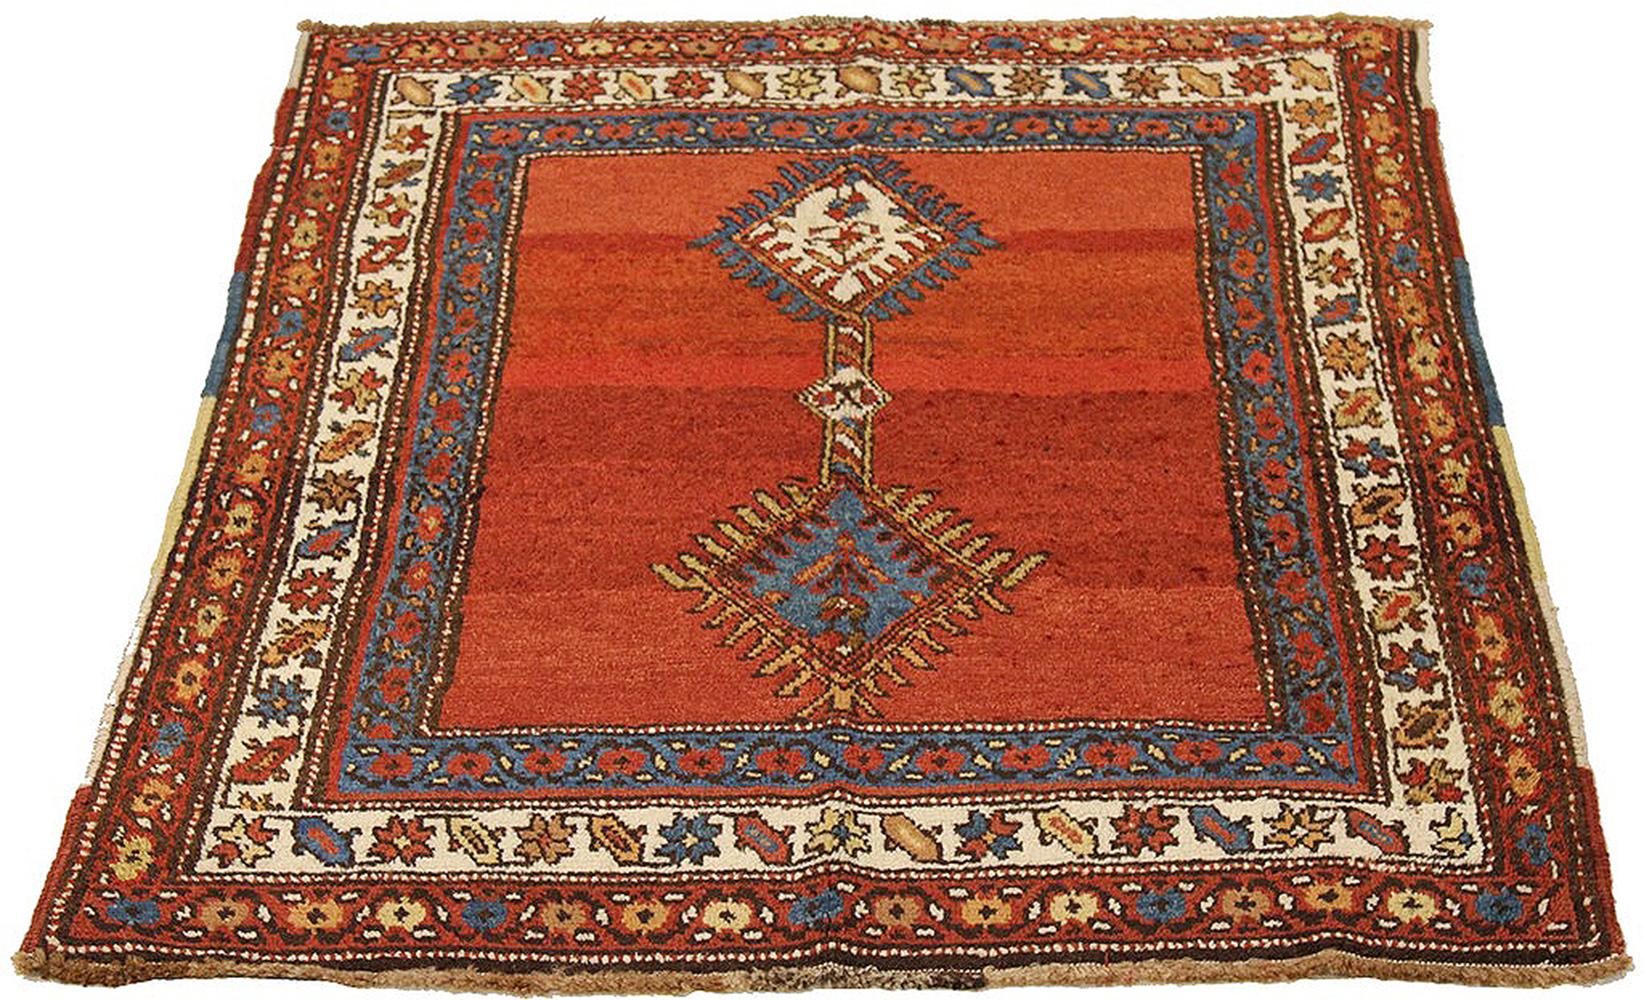 Antique Azerbaijan rug handwoven from the finest sheep’s wool and colored with all-natural vegetable dyes that are safe for humans and pets. It’s a traditional Azerbaijani design featuring floral details in blue and red. It’s a beautiful piece for